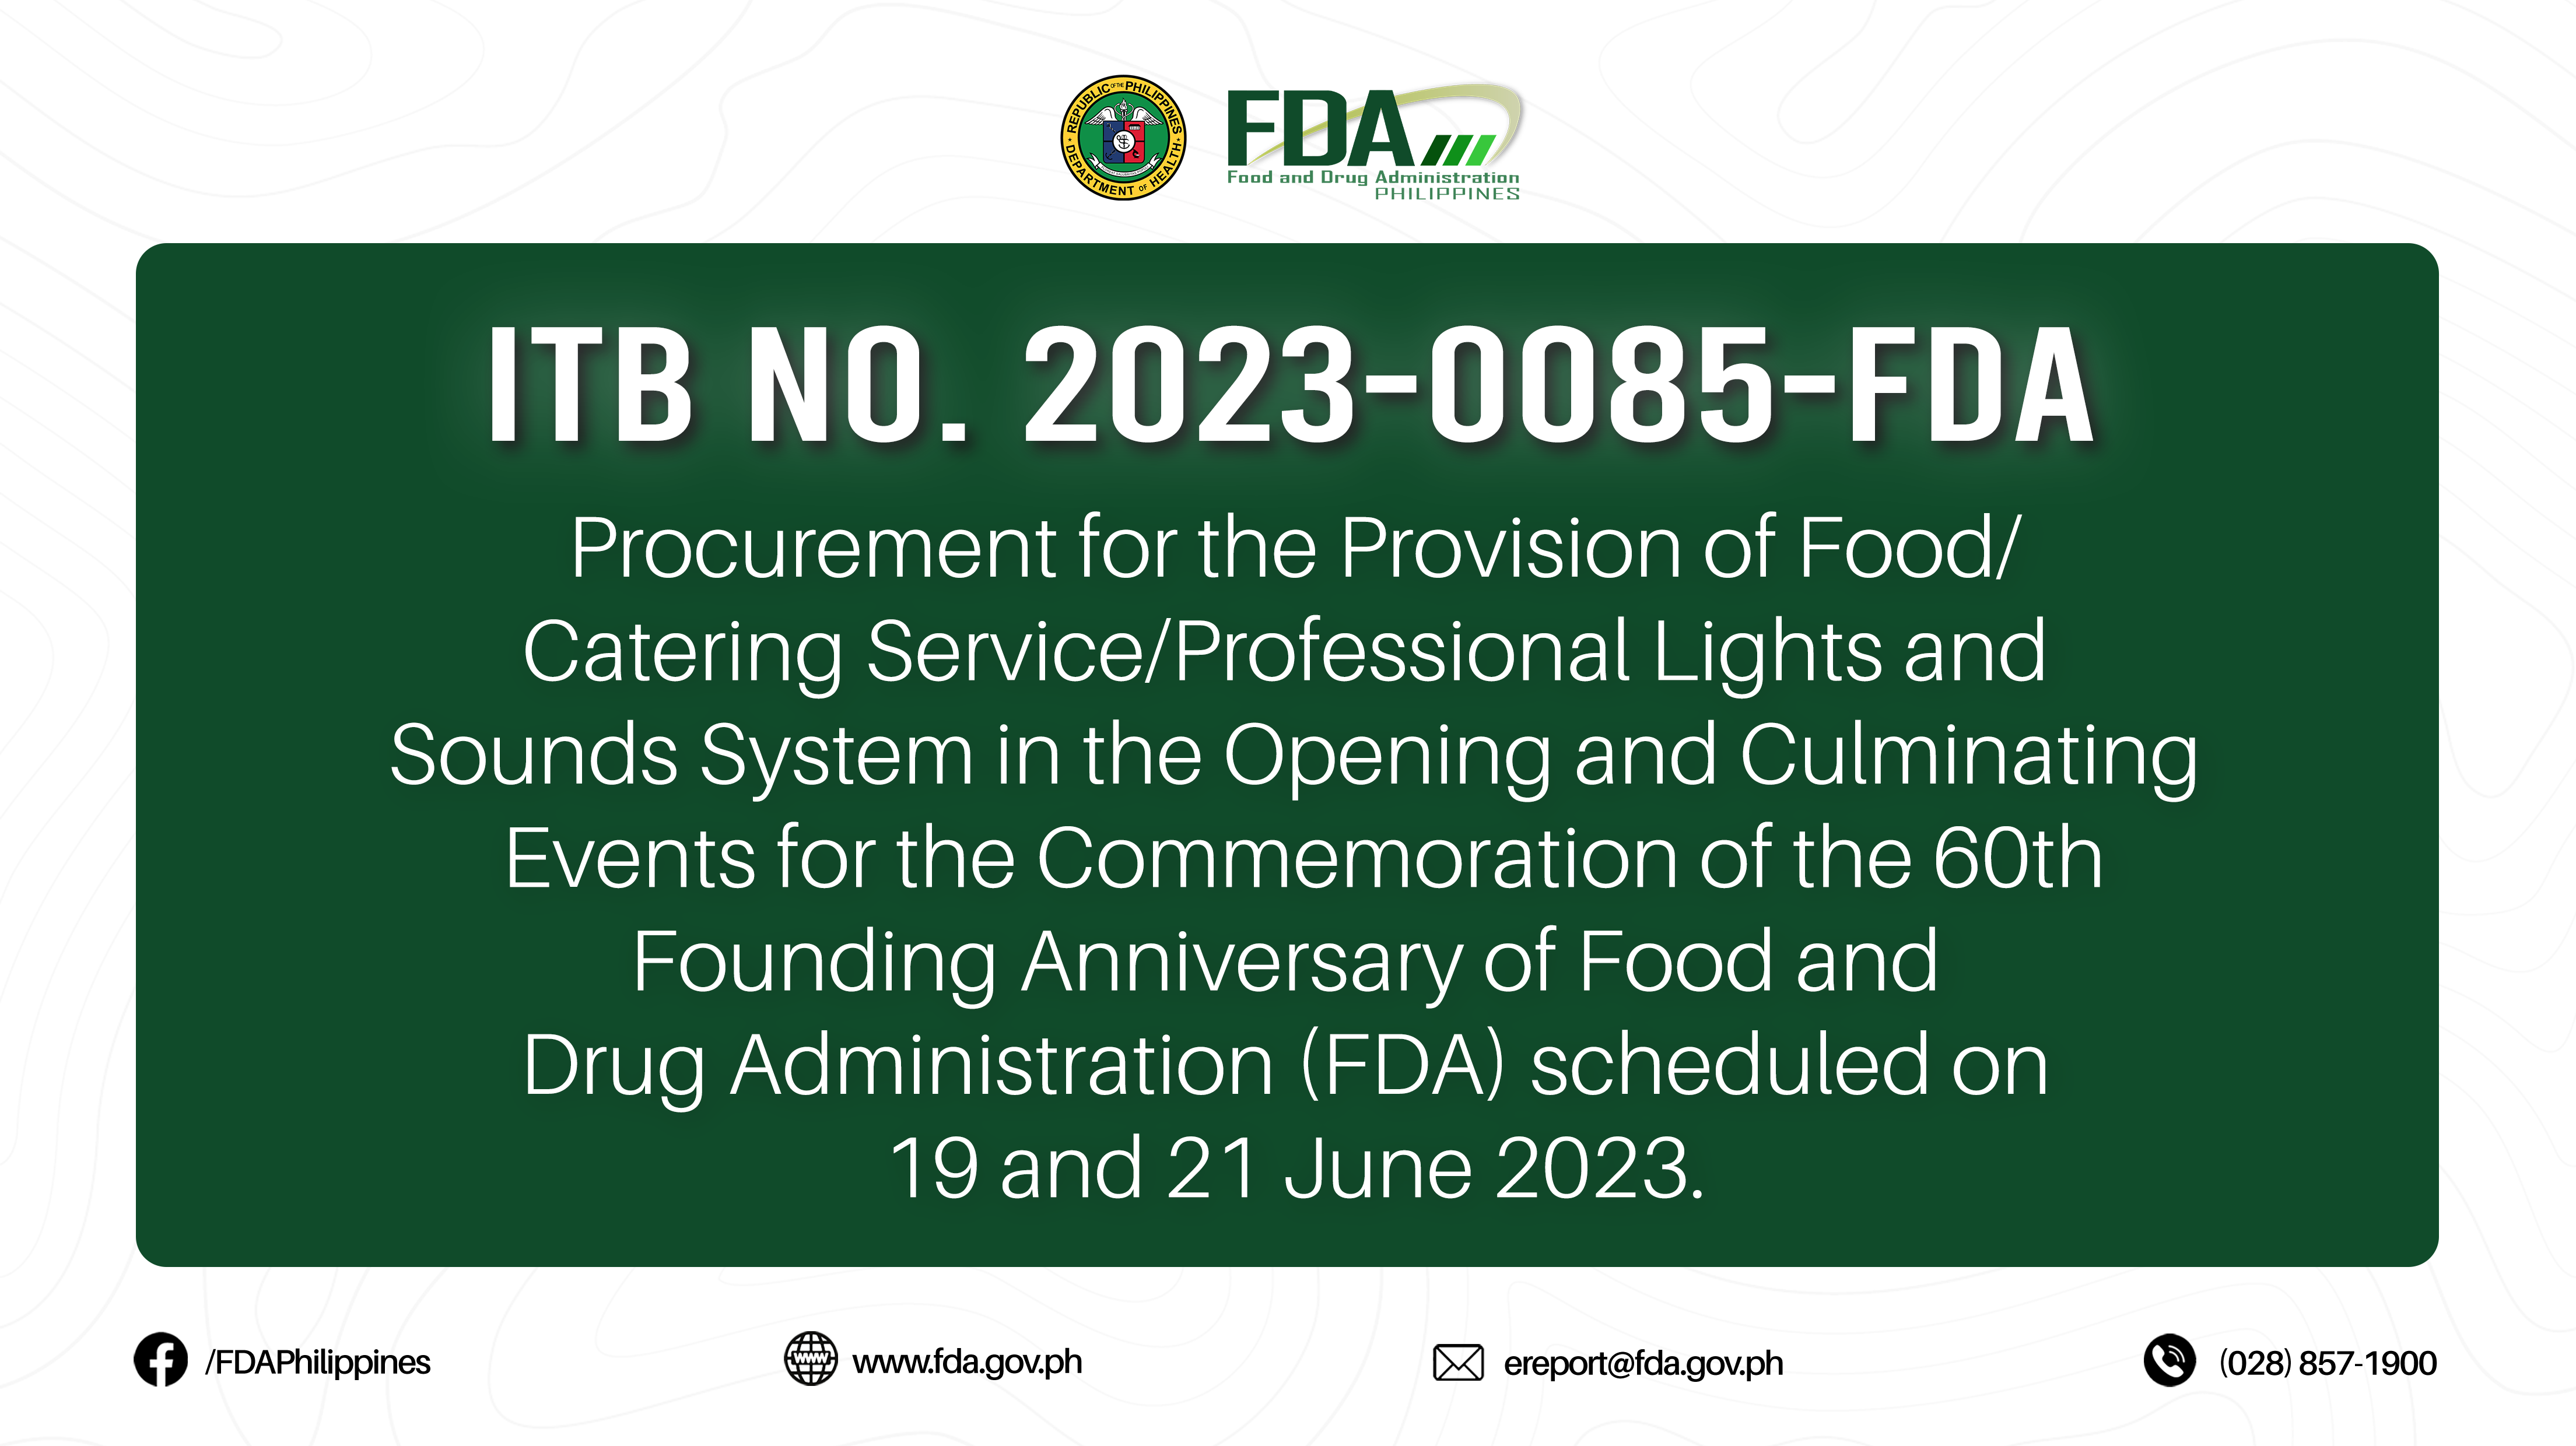 ITB No 2023-0085-FDA || Procurement for the Provision of Food/Catering Service/Professional Lights and Sounds System in the Opening and Culminating Events for the Commemoration of the 60th Founding Anniversary of Food and Drug Administration (FDA) scheduled on 19 and 21  June 2023.